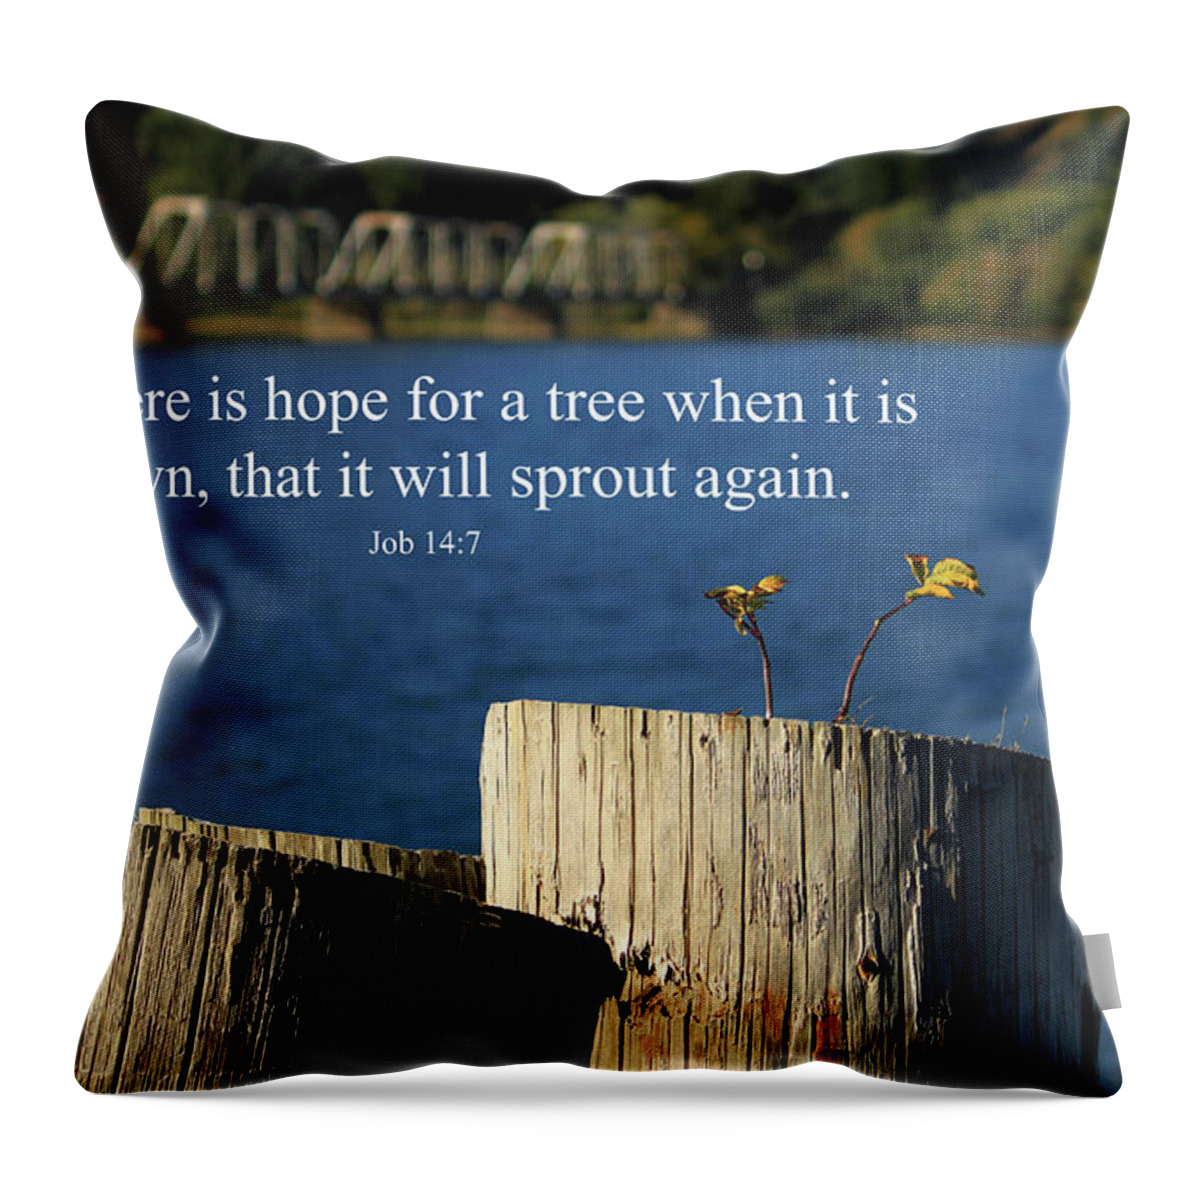 Inspirational Throw Pillow featuring the photograph Hope For A Tree by James Eddy